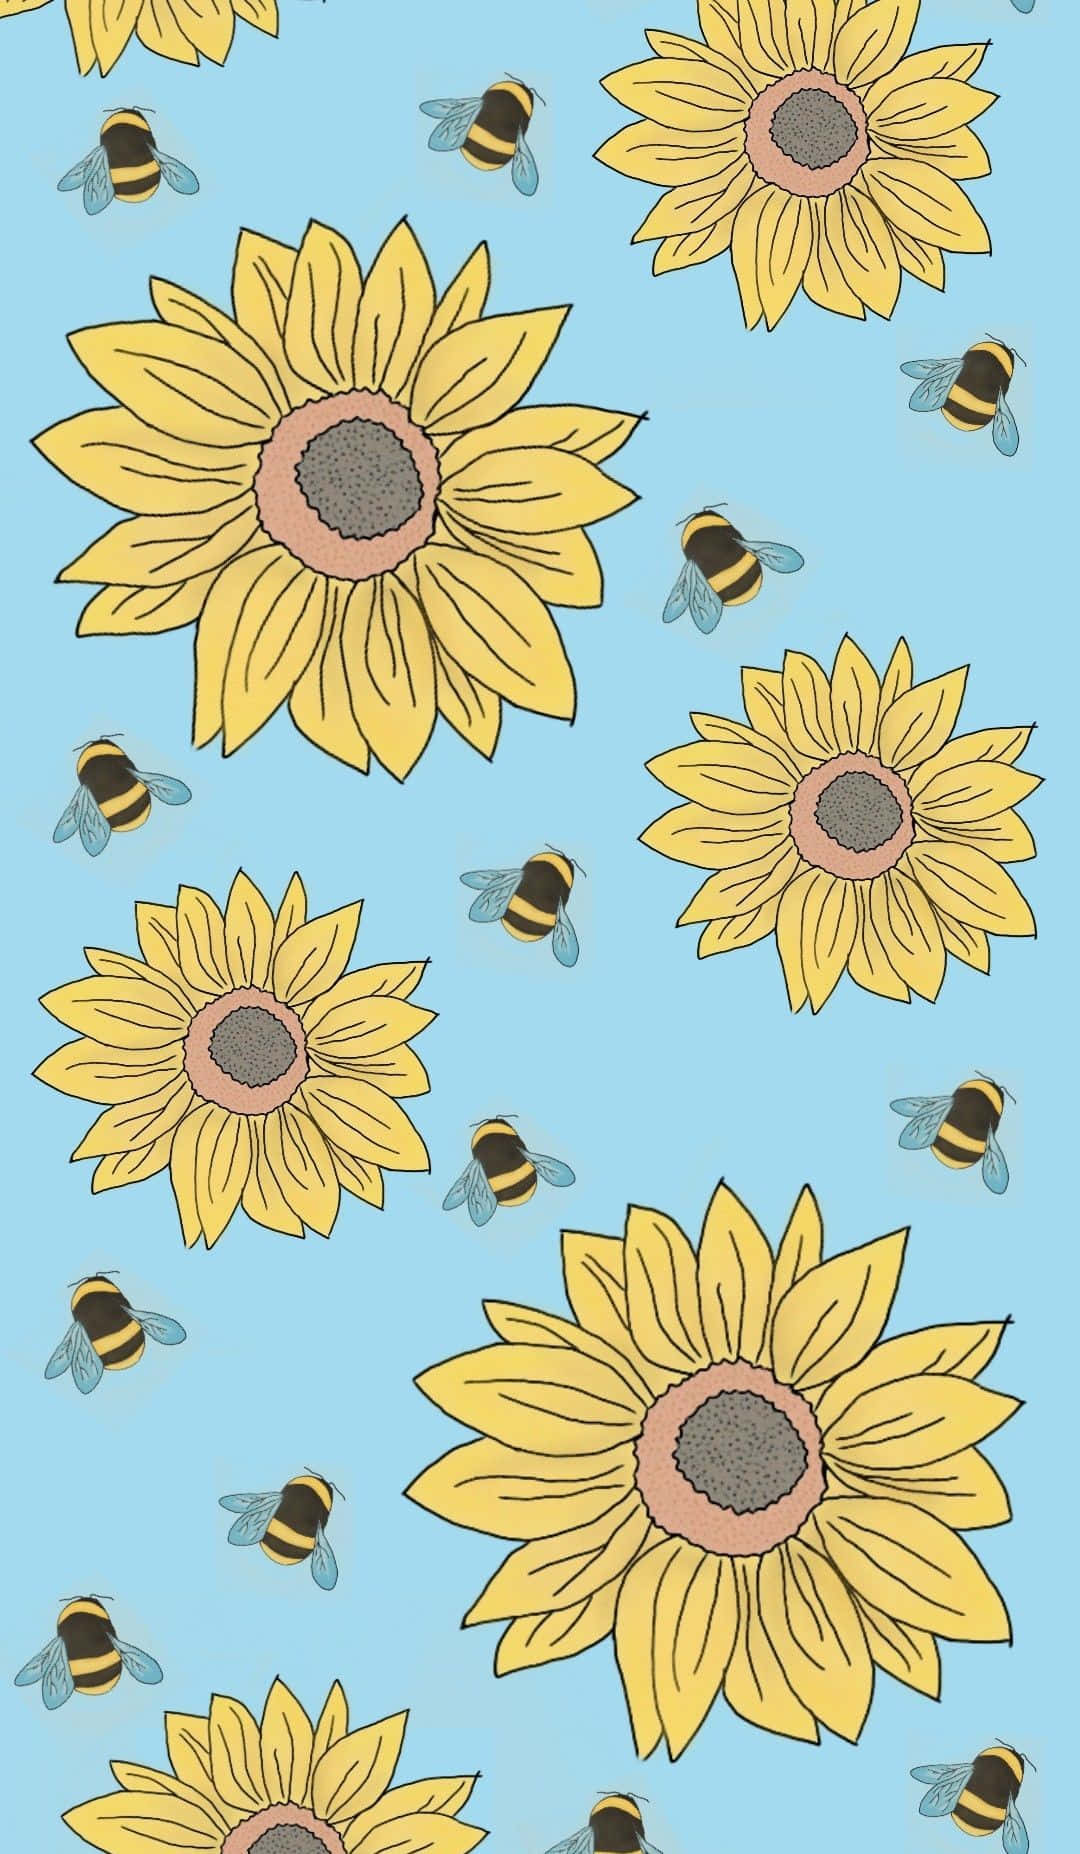 Brighten up your day with this cheerful sunflower aesthetic Iphone wallpaper! Wallpaper